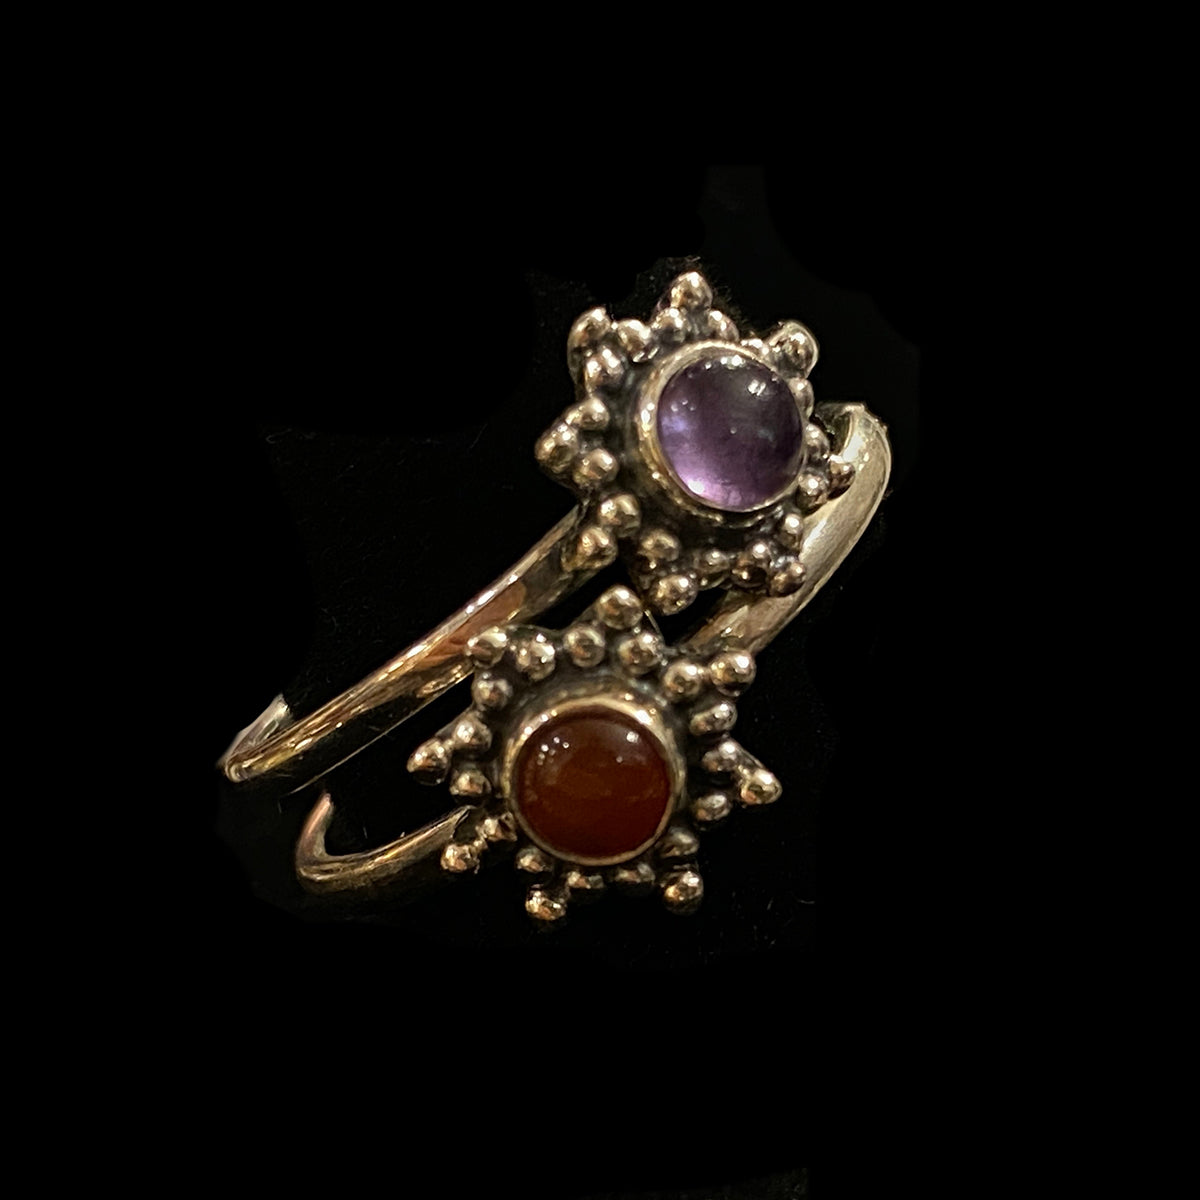 Amethyst & Carnelian Star Rings-Size 8 - Vintage India NYC